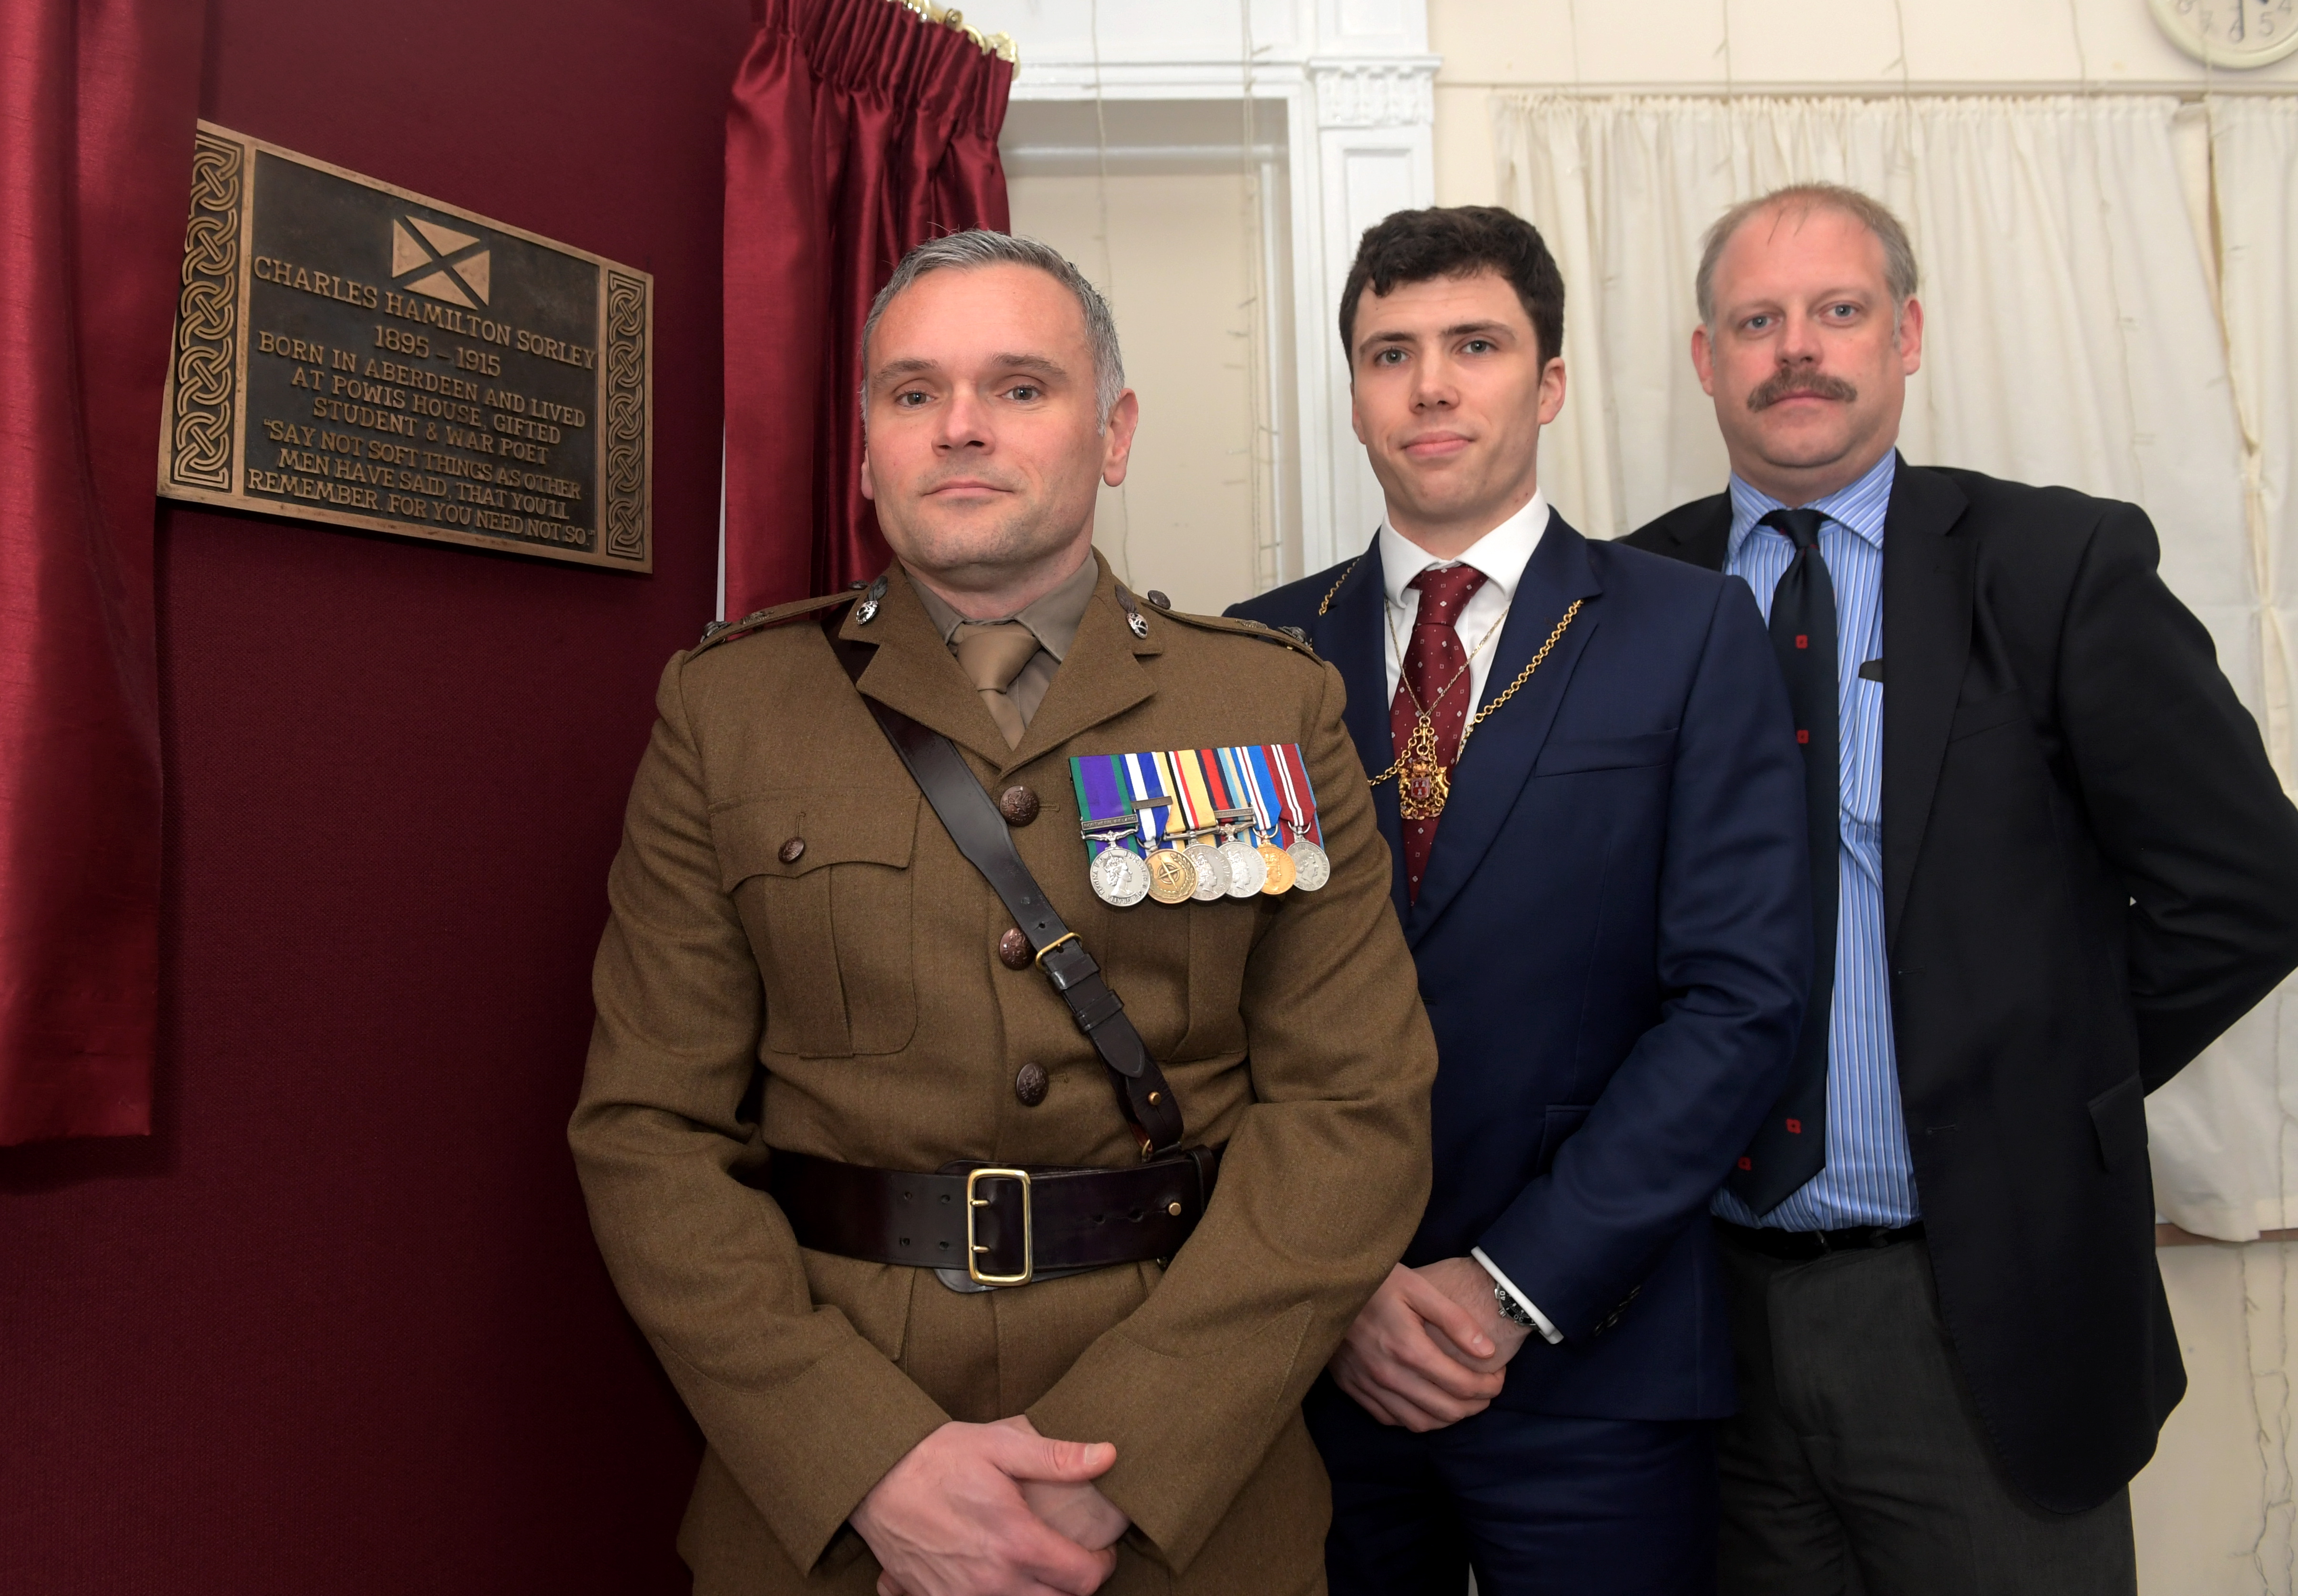 From left, Lieutenant Colonel Geraint Davies, Councillor Ryan Houghton and Aberdeen University's Neil McLennan.

Picture by KATH FLANNERY